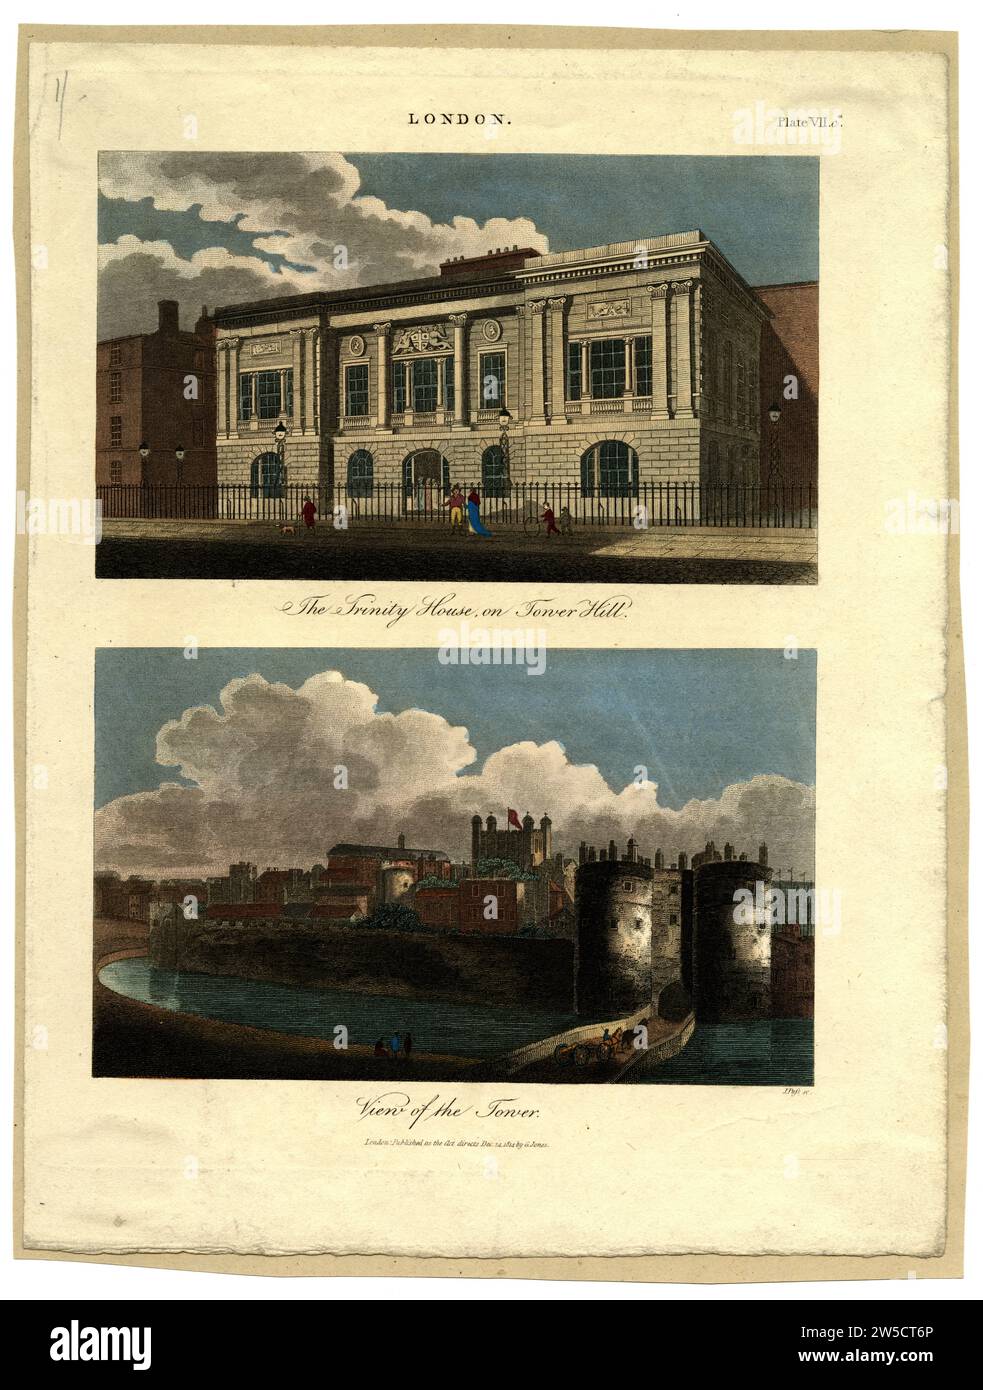 Print engravings entitled, 'The Trinity House, on Tower Hill' and ' View of the Tower' early 19th century, Britain Stock Photo